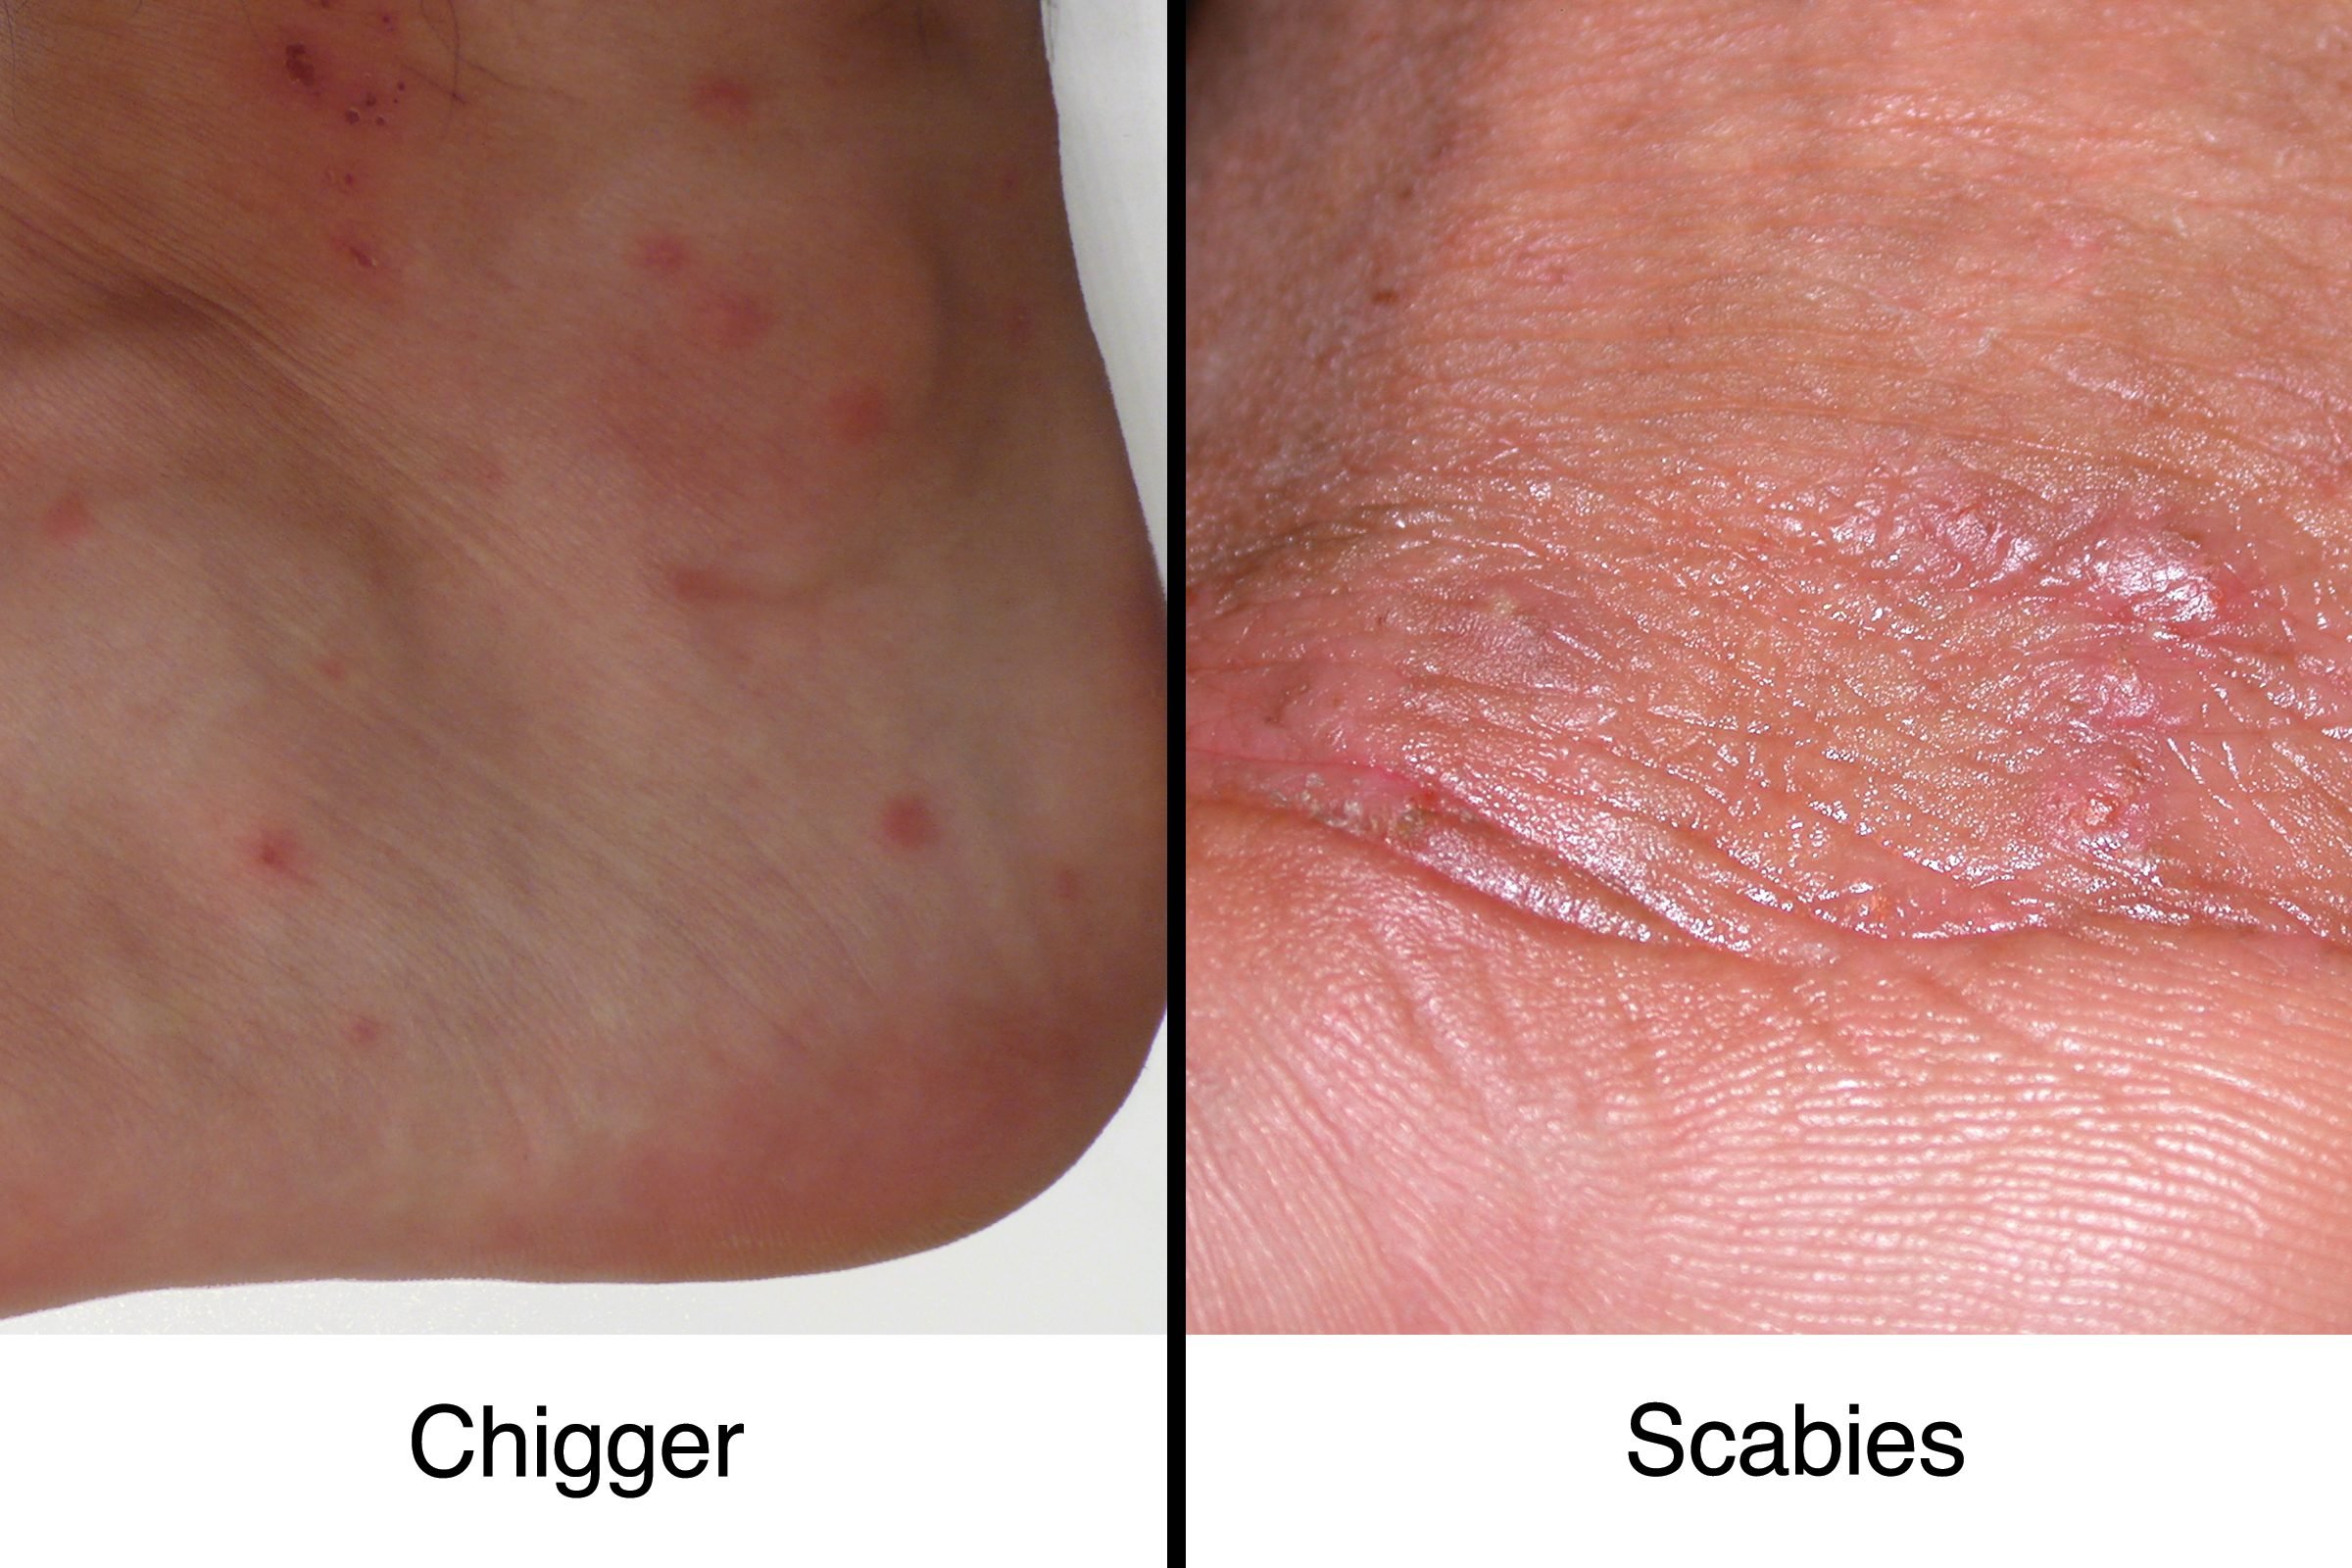 Chigger Bites Vs Scabies How To Tell The Difference The Healthy